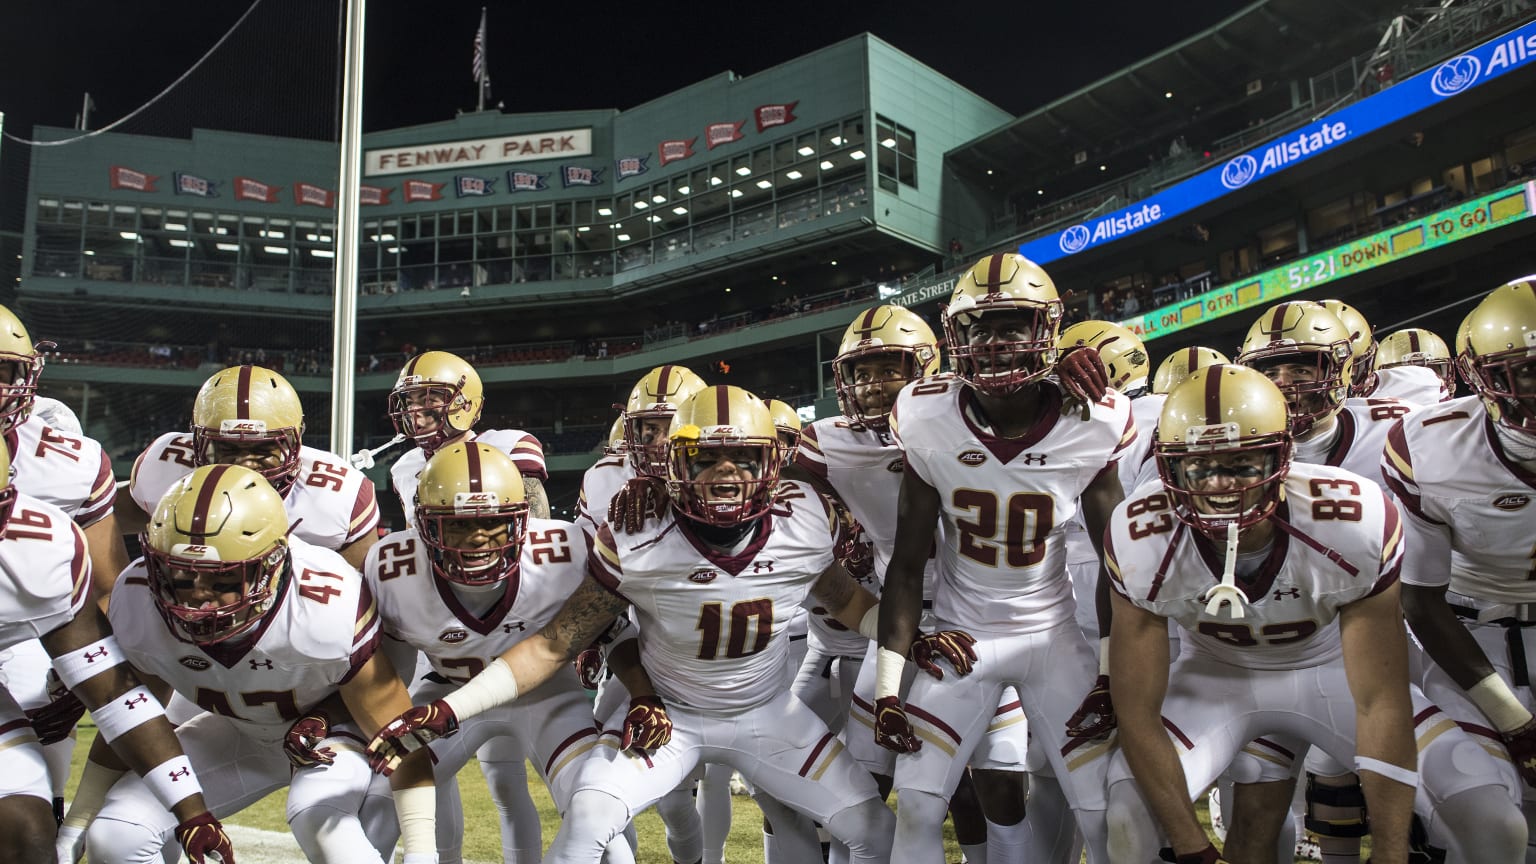 BC to Play 10th Annual ALS Game at Fenway Park - Boston College